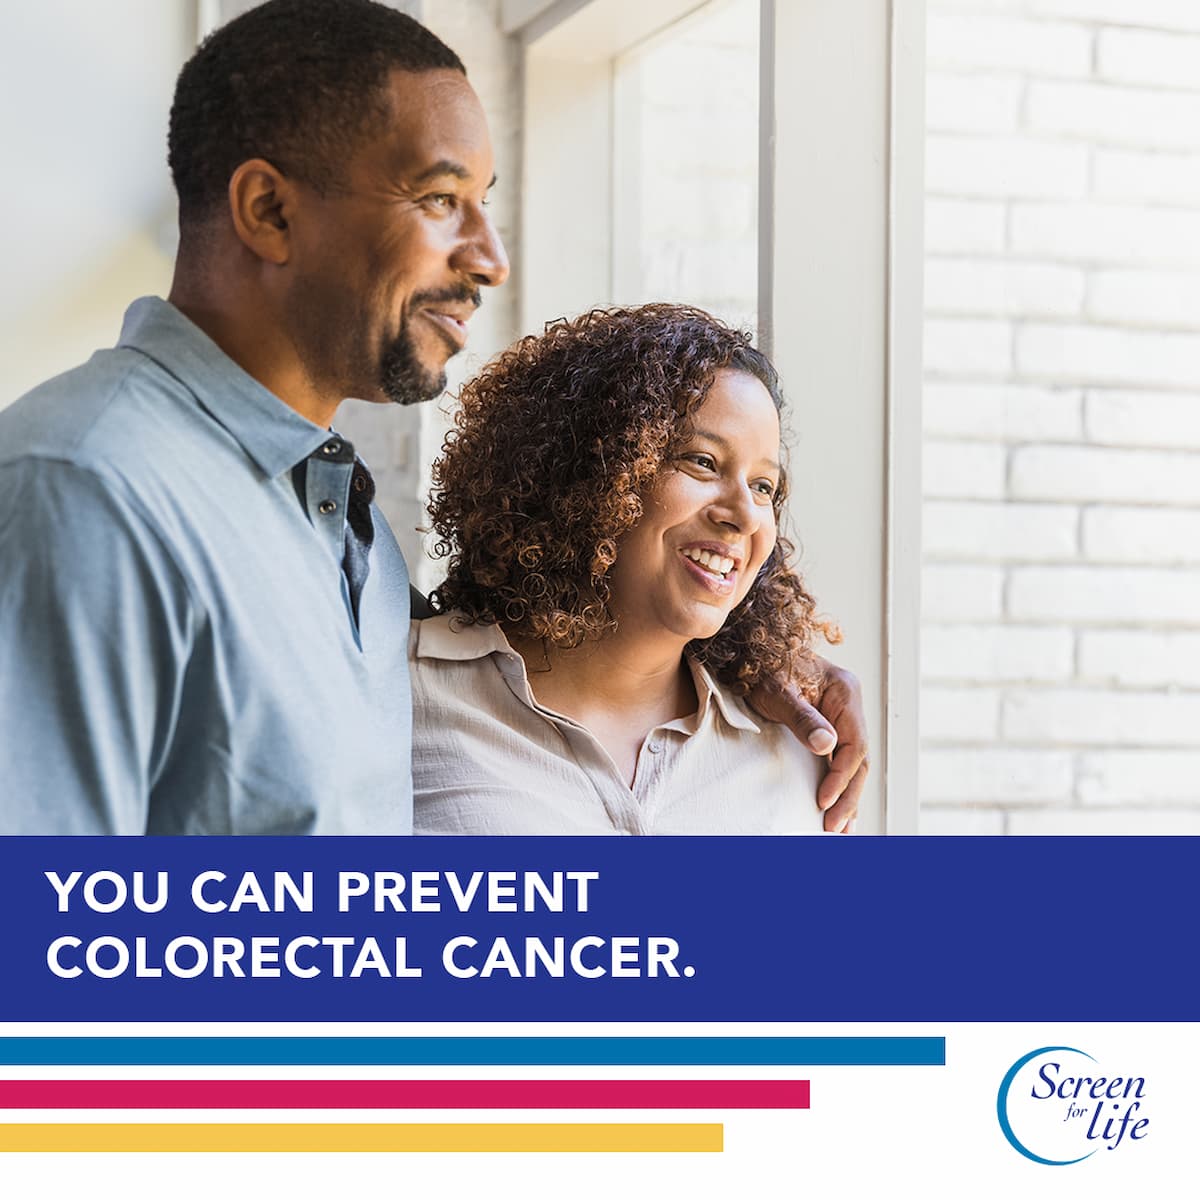 Healthcare Providers: Check out this factsheet from the American Cancer Society about colorectal cancer and its risk factors, prevention, and treatment: bit.ly/3pM78km